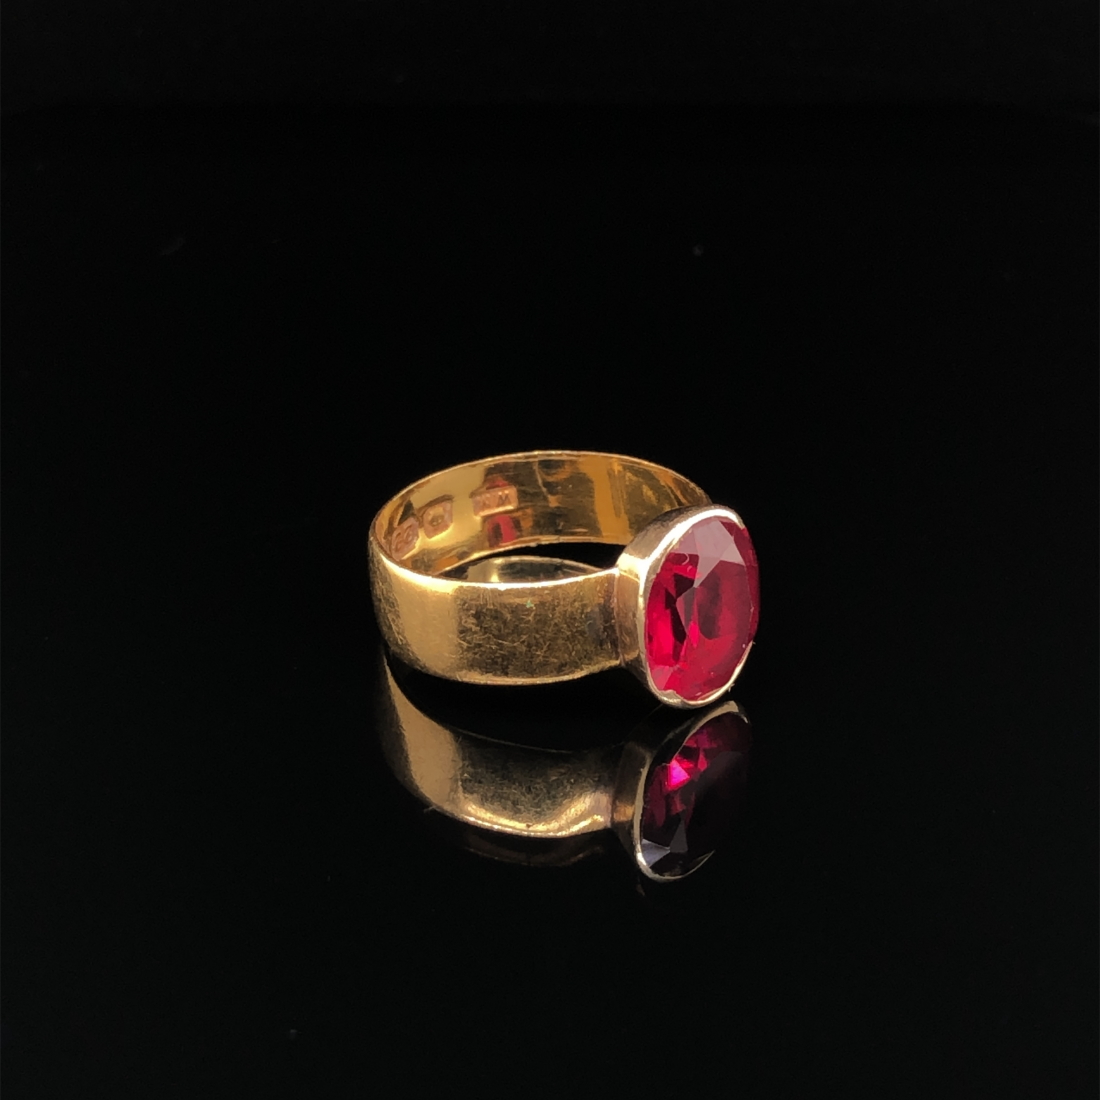 AN ANTIQUE 22ct HALLMARKED GOLD GEMSET RING, WITH A 10ct GOLD SETTING. DATED 1908, BIRMINGHAM. - Image 7 of 10